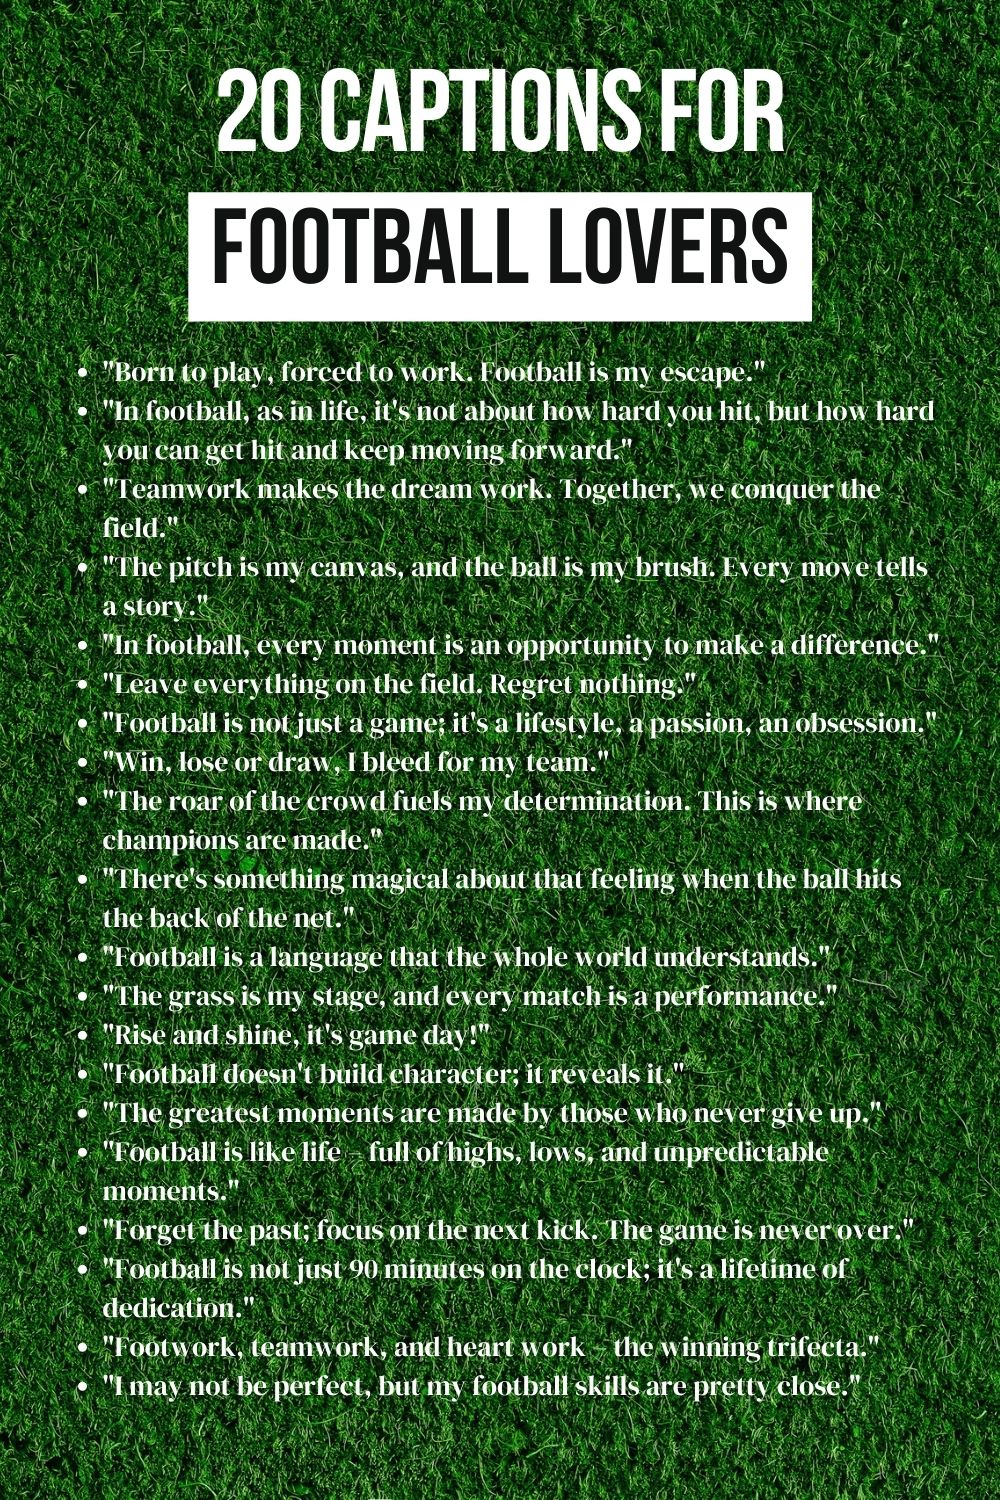 Captions for football lovers